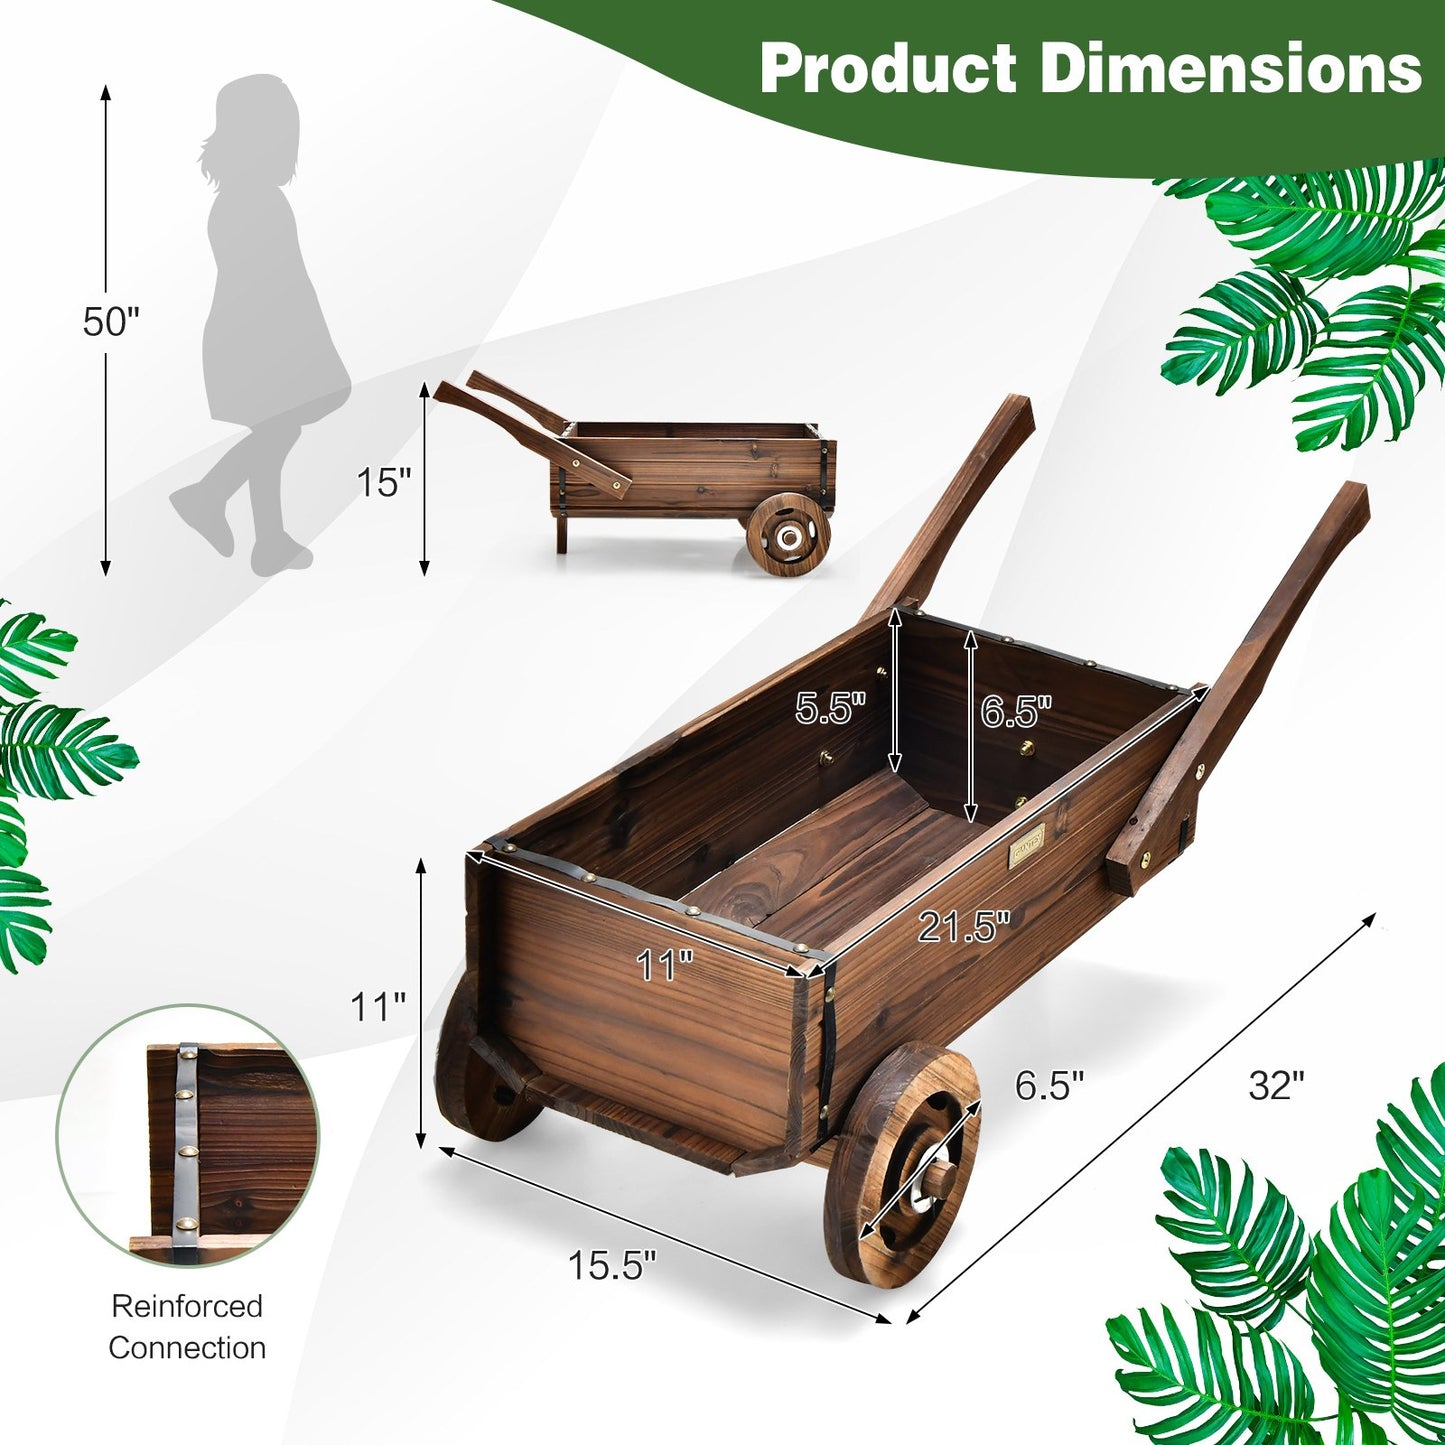 Wooden Wagon Planter Box with Wheels Handles and Drainage Hole, Rustic Brown - Gallery Canada